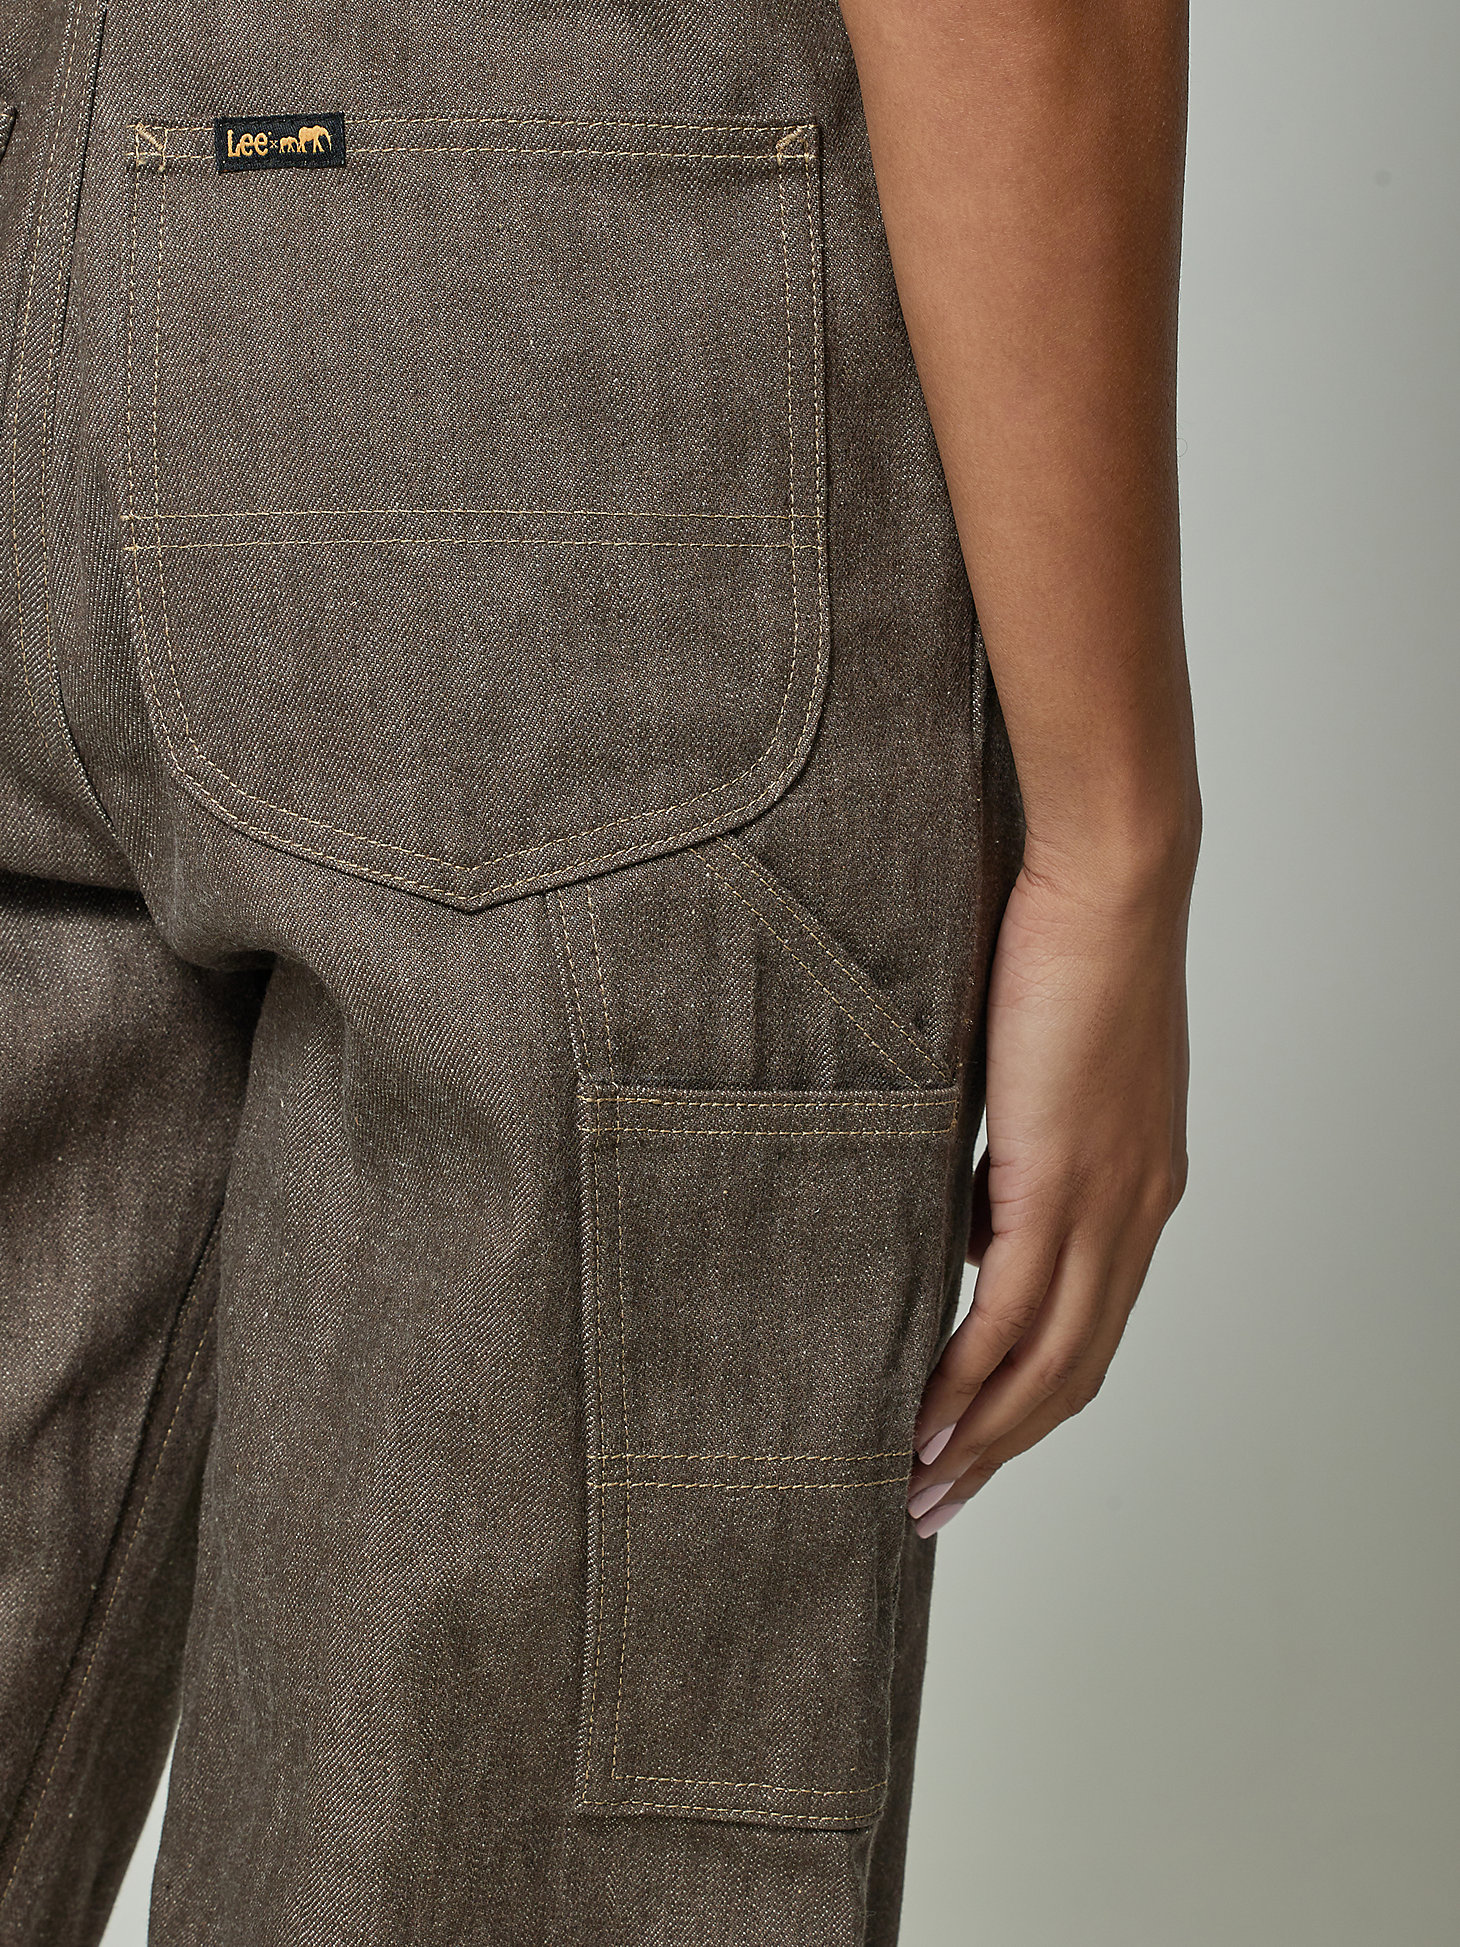 Lee® x The Brooklyn Circus® Whizit Overall in Brown alternative view 4